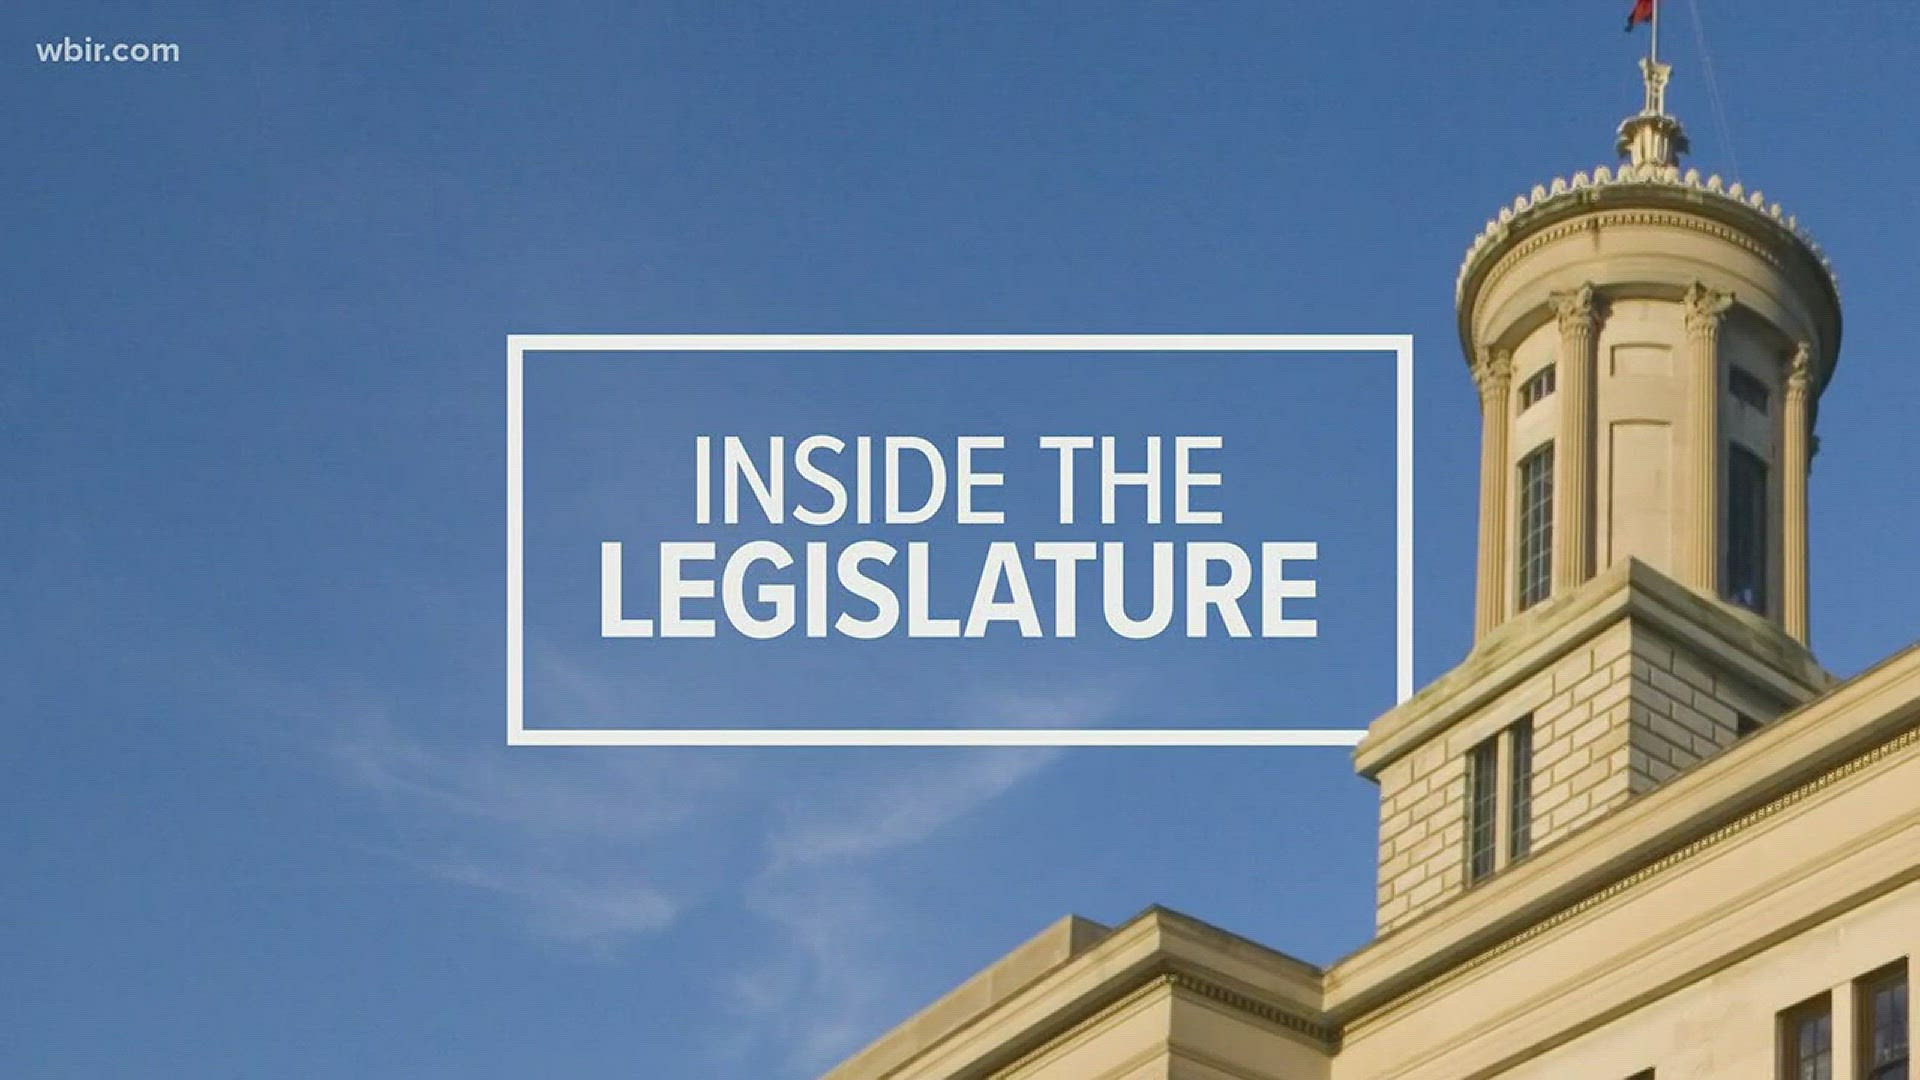 Thursday was the last day lawmakers could submit bills for this legislative session.